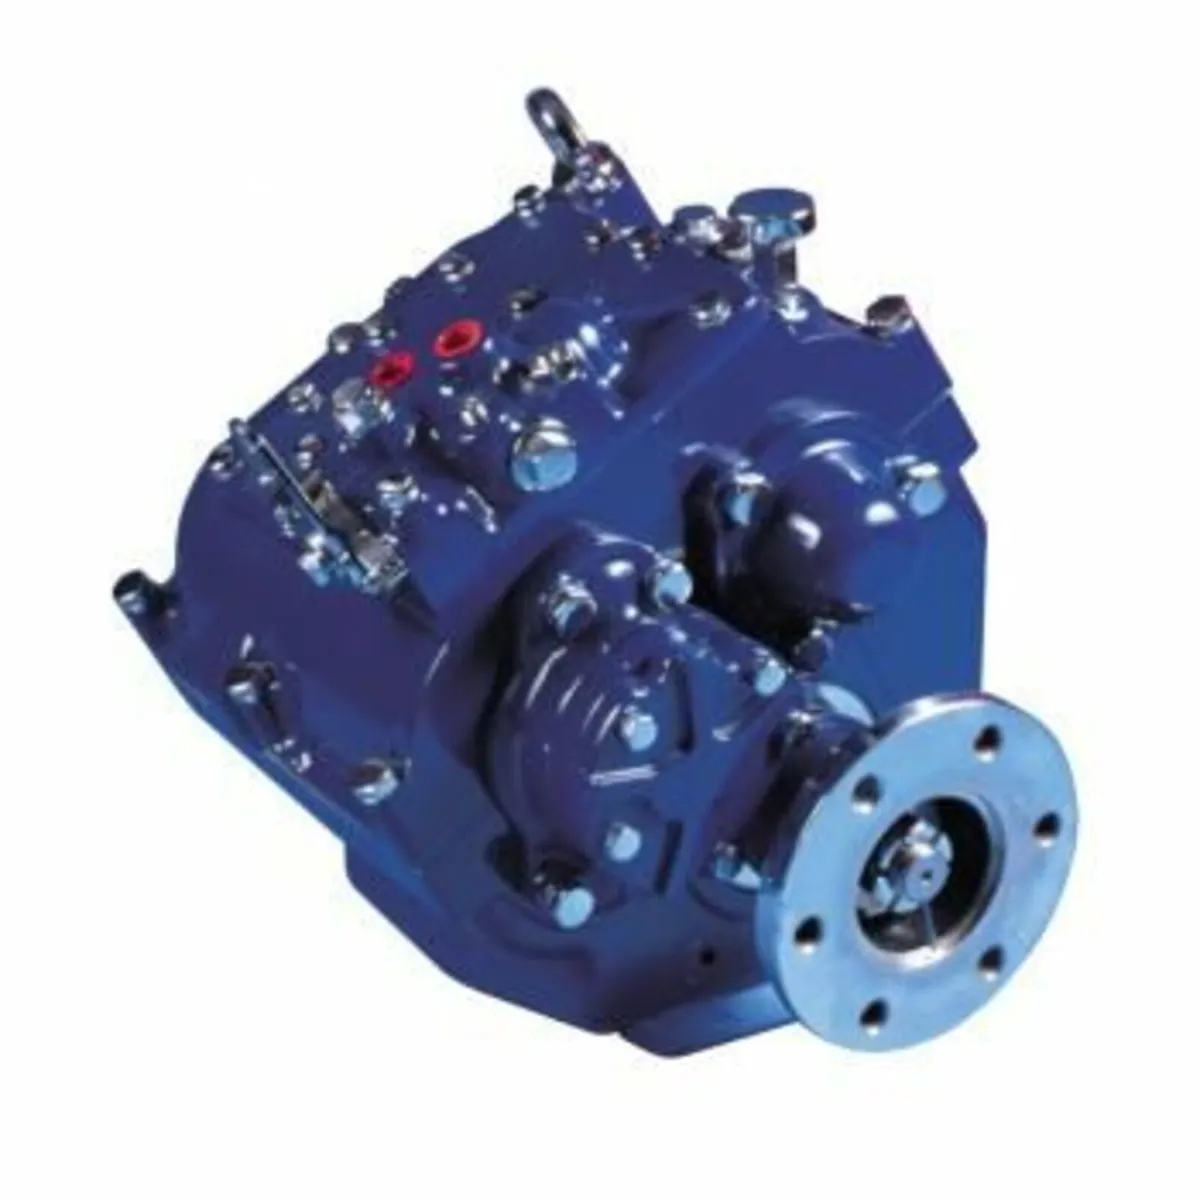 PRM 500 Hydraulic Gearboxes In Stock (28)